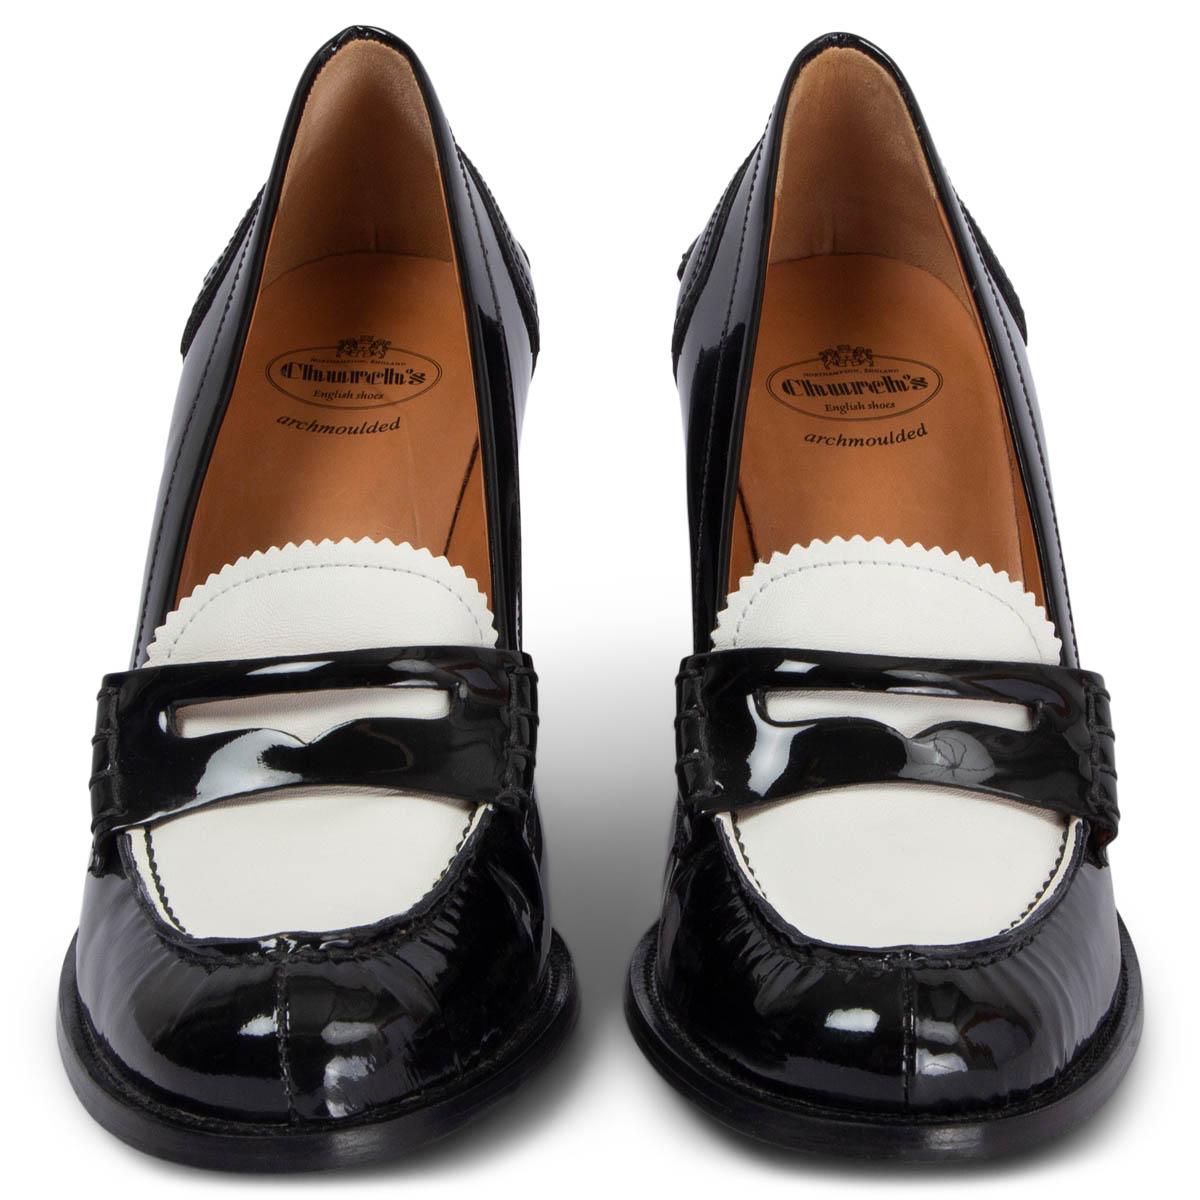 100% authentic Church's block-heel loafers in black patent leather and white calfskin. Have been worn and are in excellent condition. 

Measurements
Imprinted Size	38
Shoe Size	38
Inside Sole	25cm (9.8in)
Width	7.5cm (2.9in)
Heel	10cm (3.9in)

All